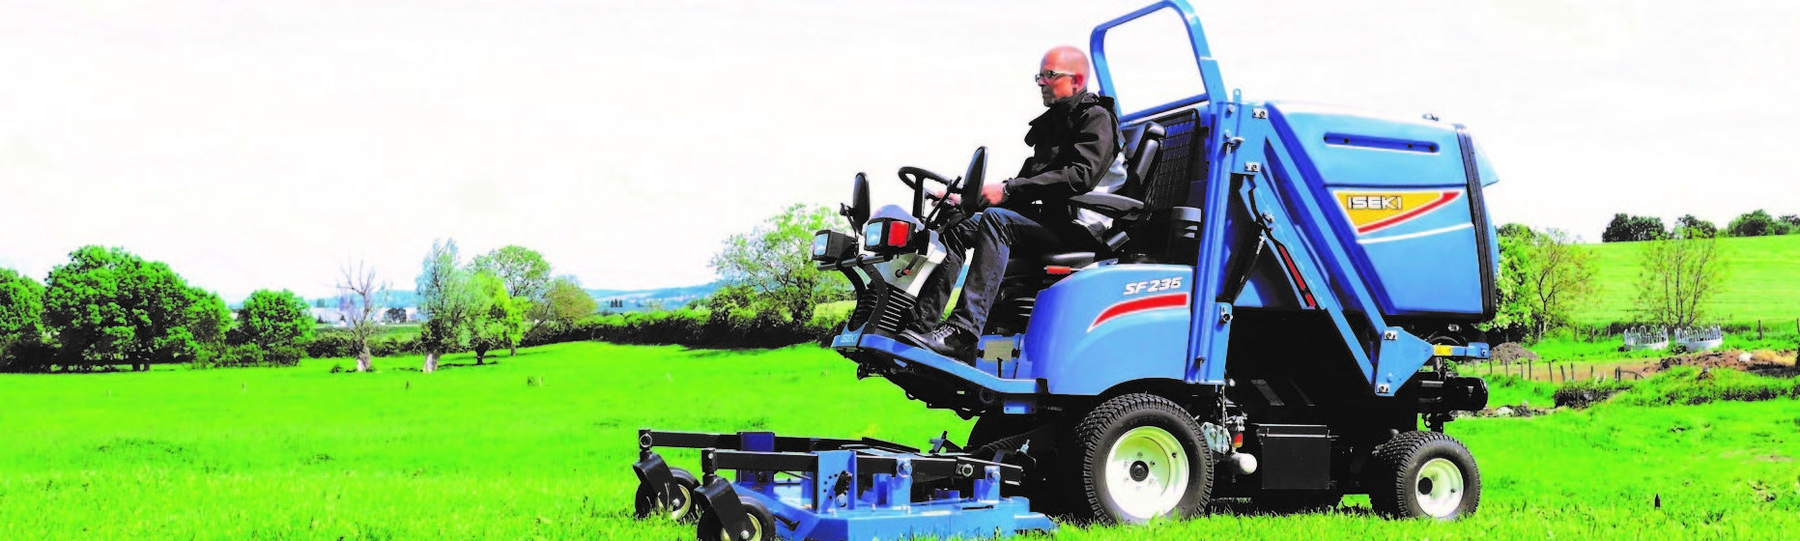 Iseki New Model SF325 cut and collect out front mower